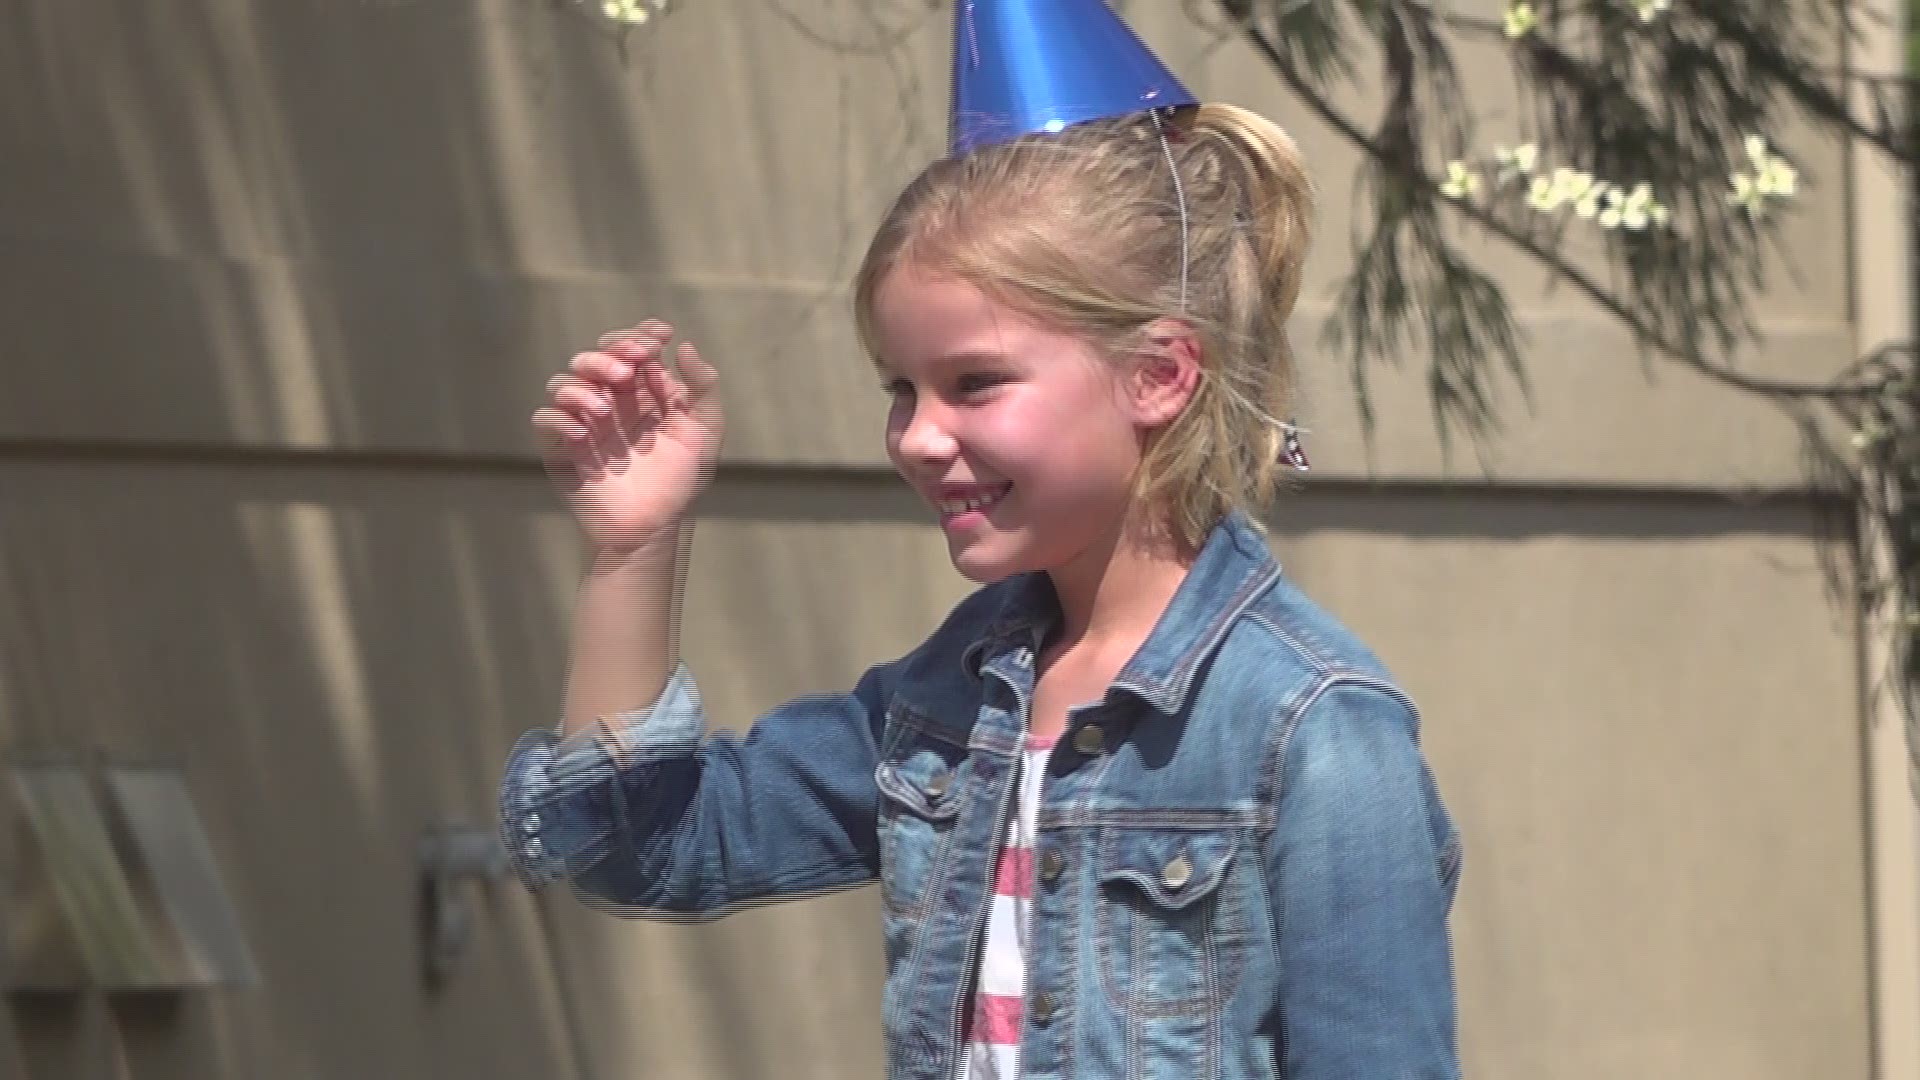 An 8-year-old girl was treated to a unique surprise party that included a parade through her neighborhood.